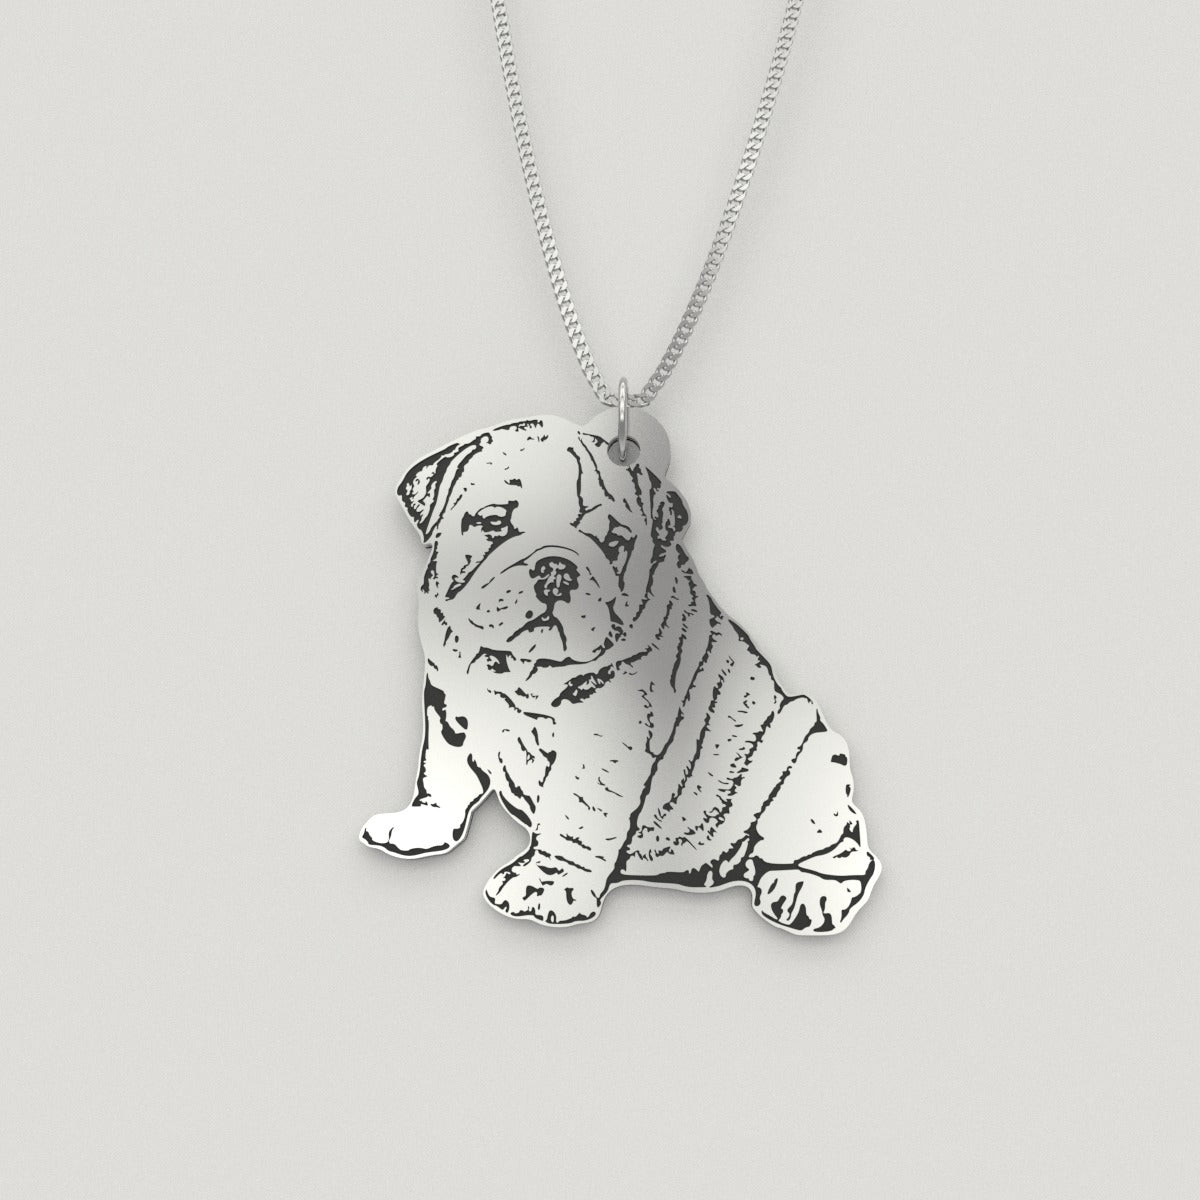 Engraved Photo Necklace With Beloved Pet